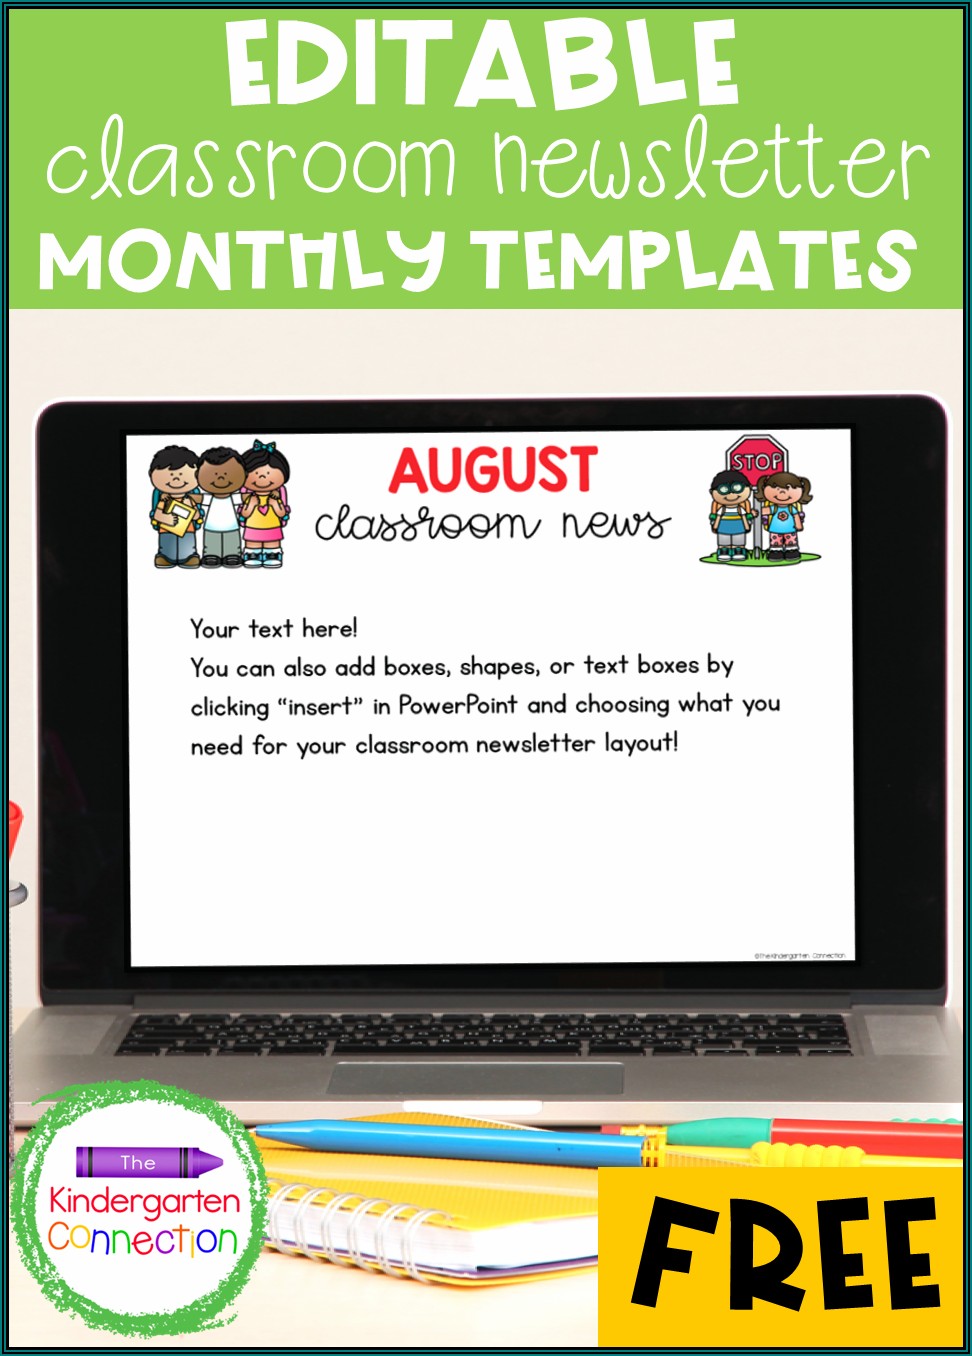 Daycare Monthly Newsletter Samples